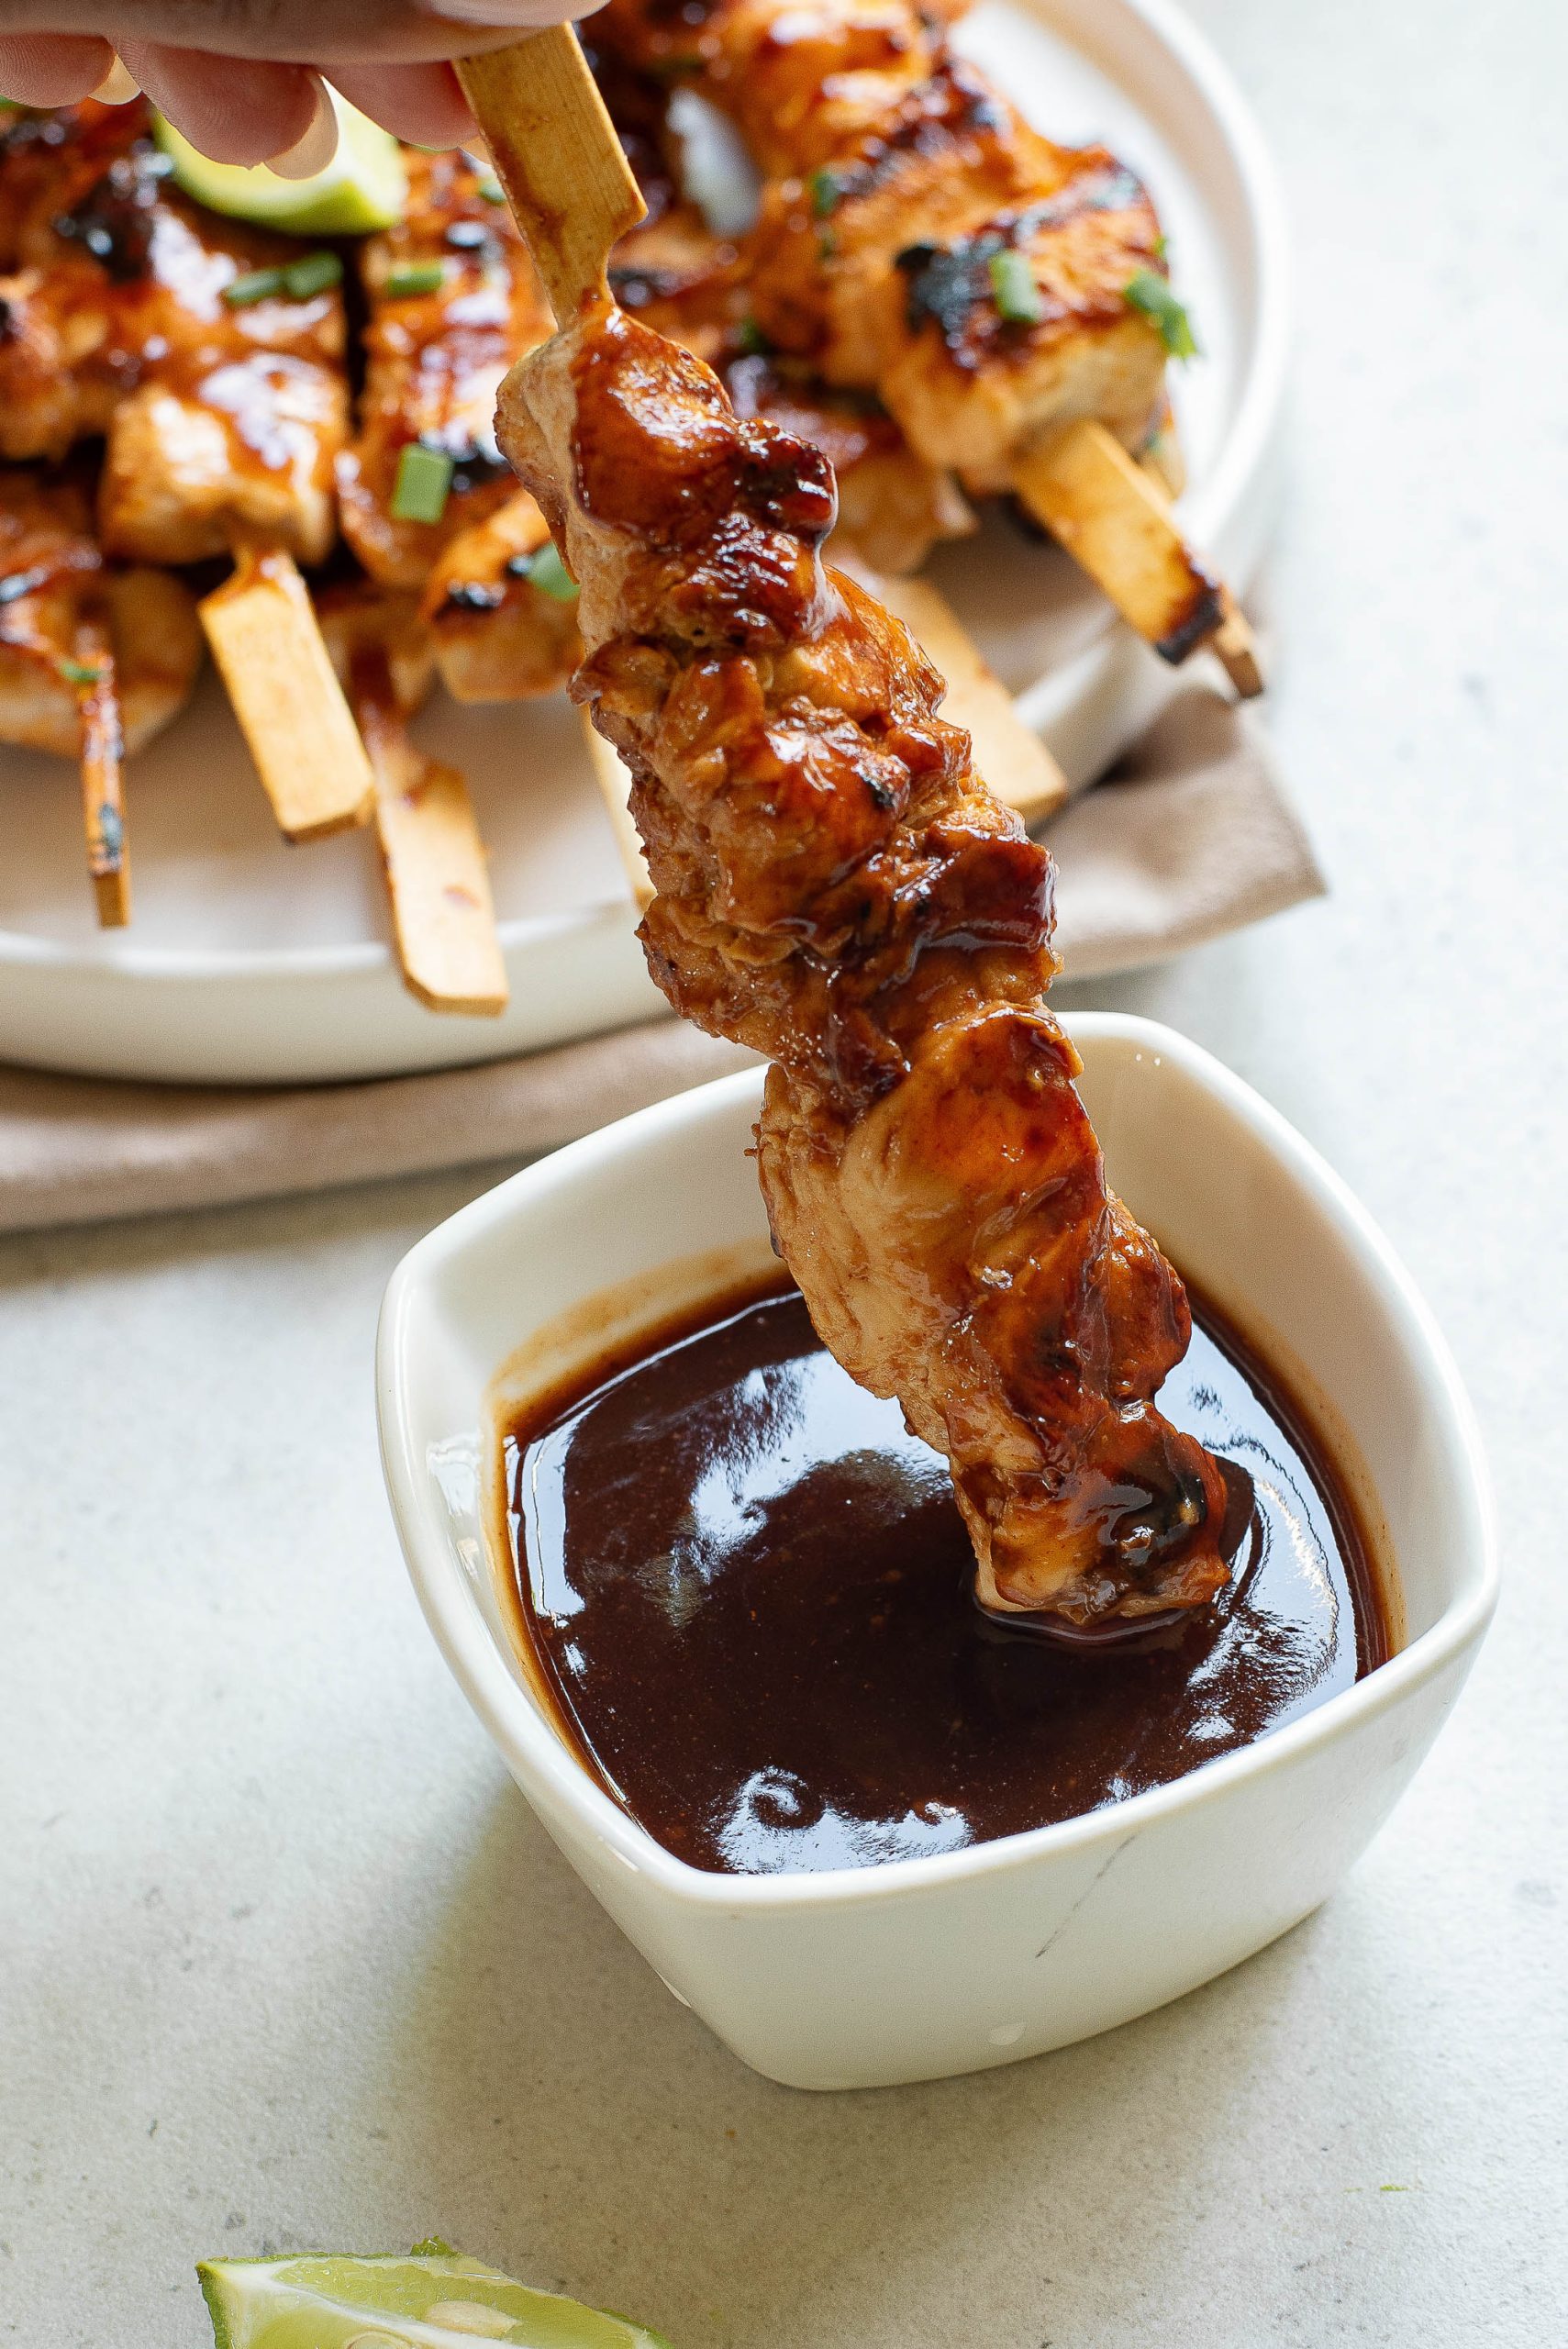 A person is dipping chicken skewers in a sauce.